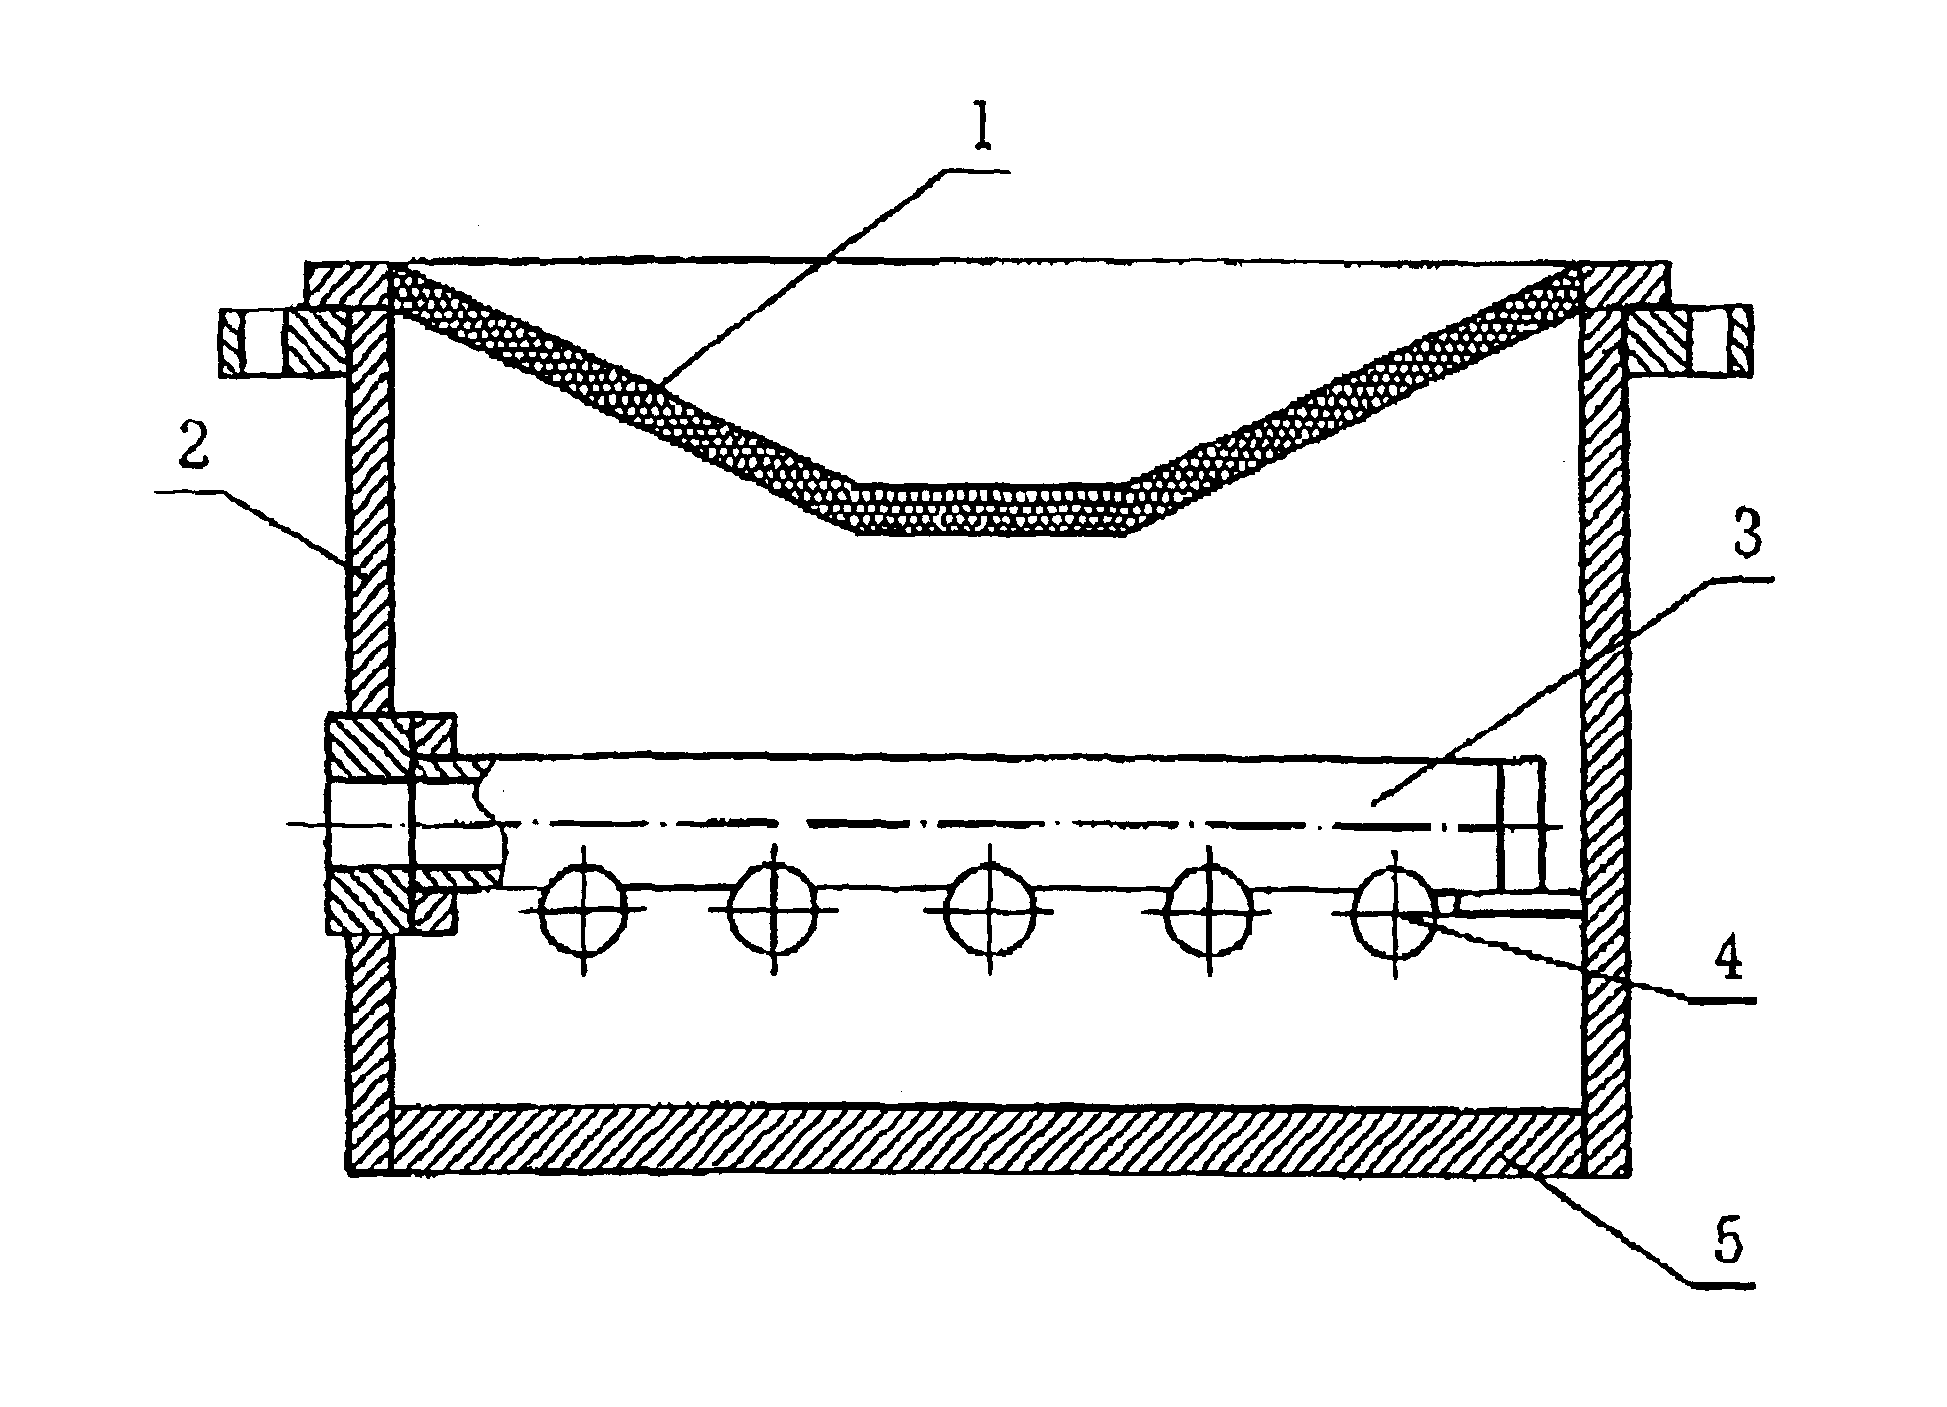 Frustum filter used for separation of cation and anion exchange resins